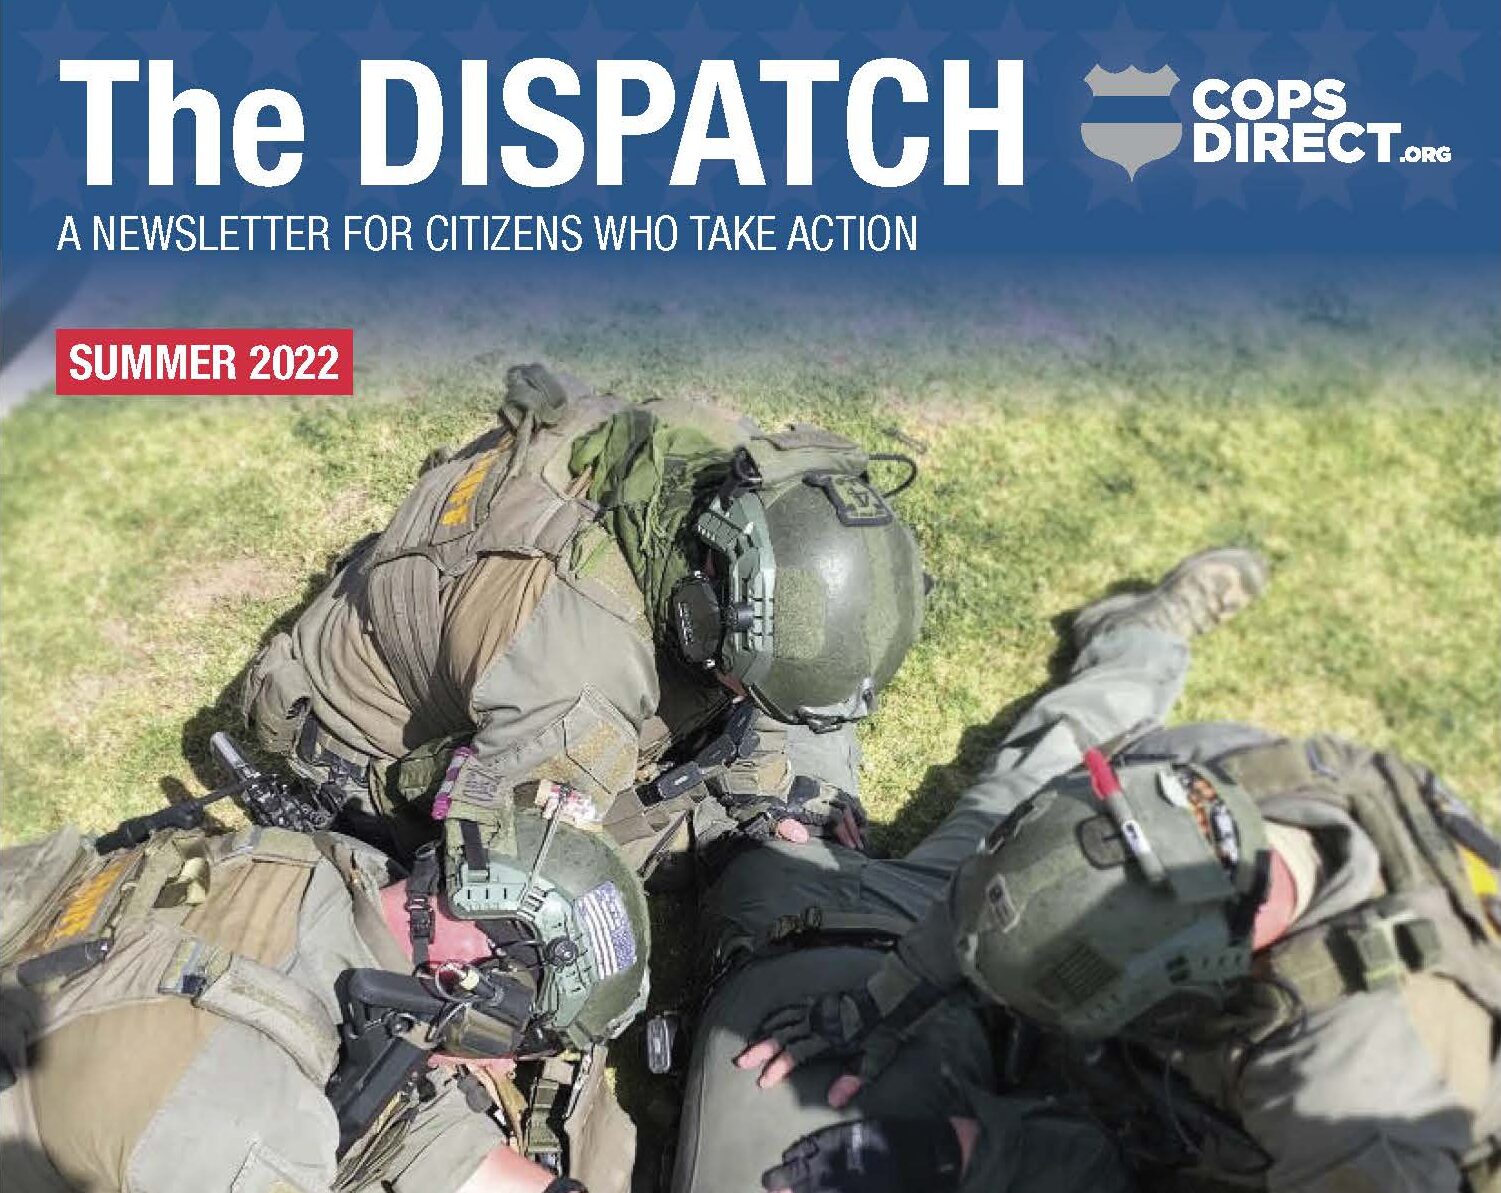 Cover of The Dispatch, Cops Direct Newsletter. Police officer training and placing a tourniquet. Summer 2022 edition.